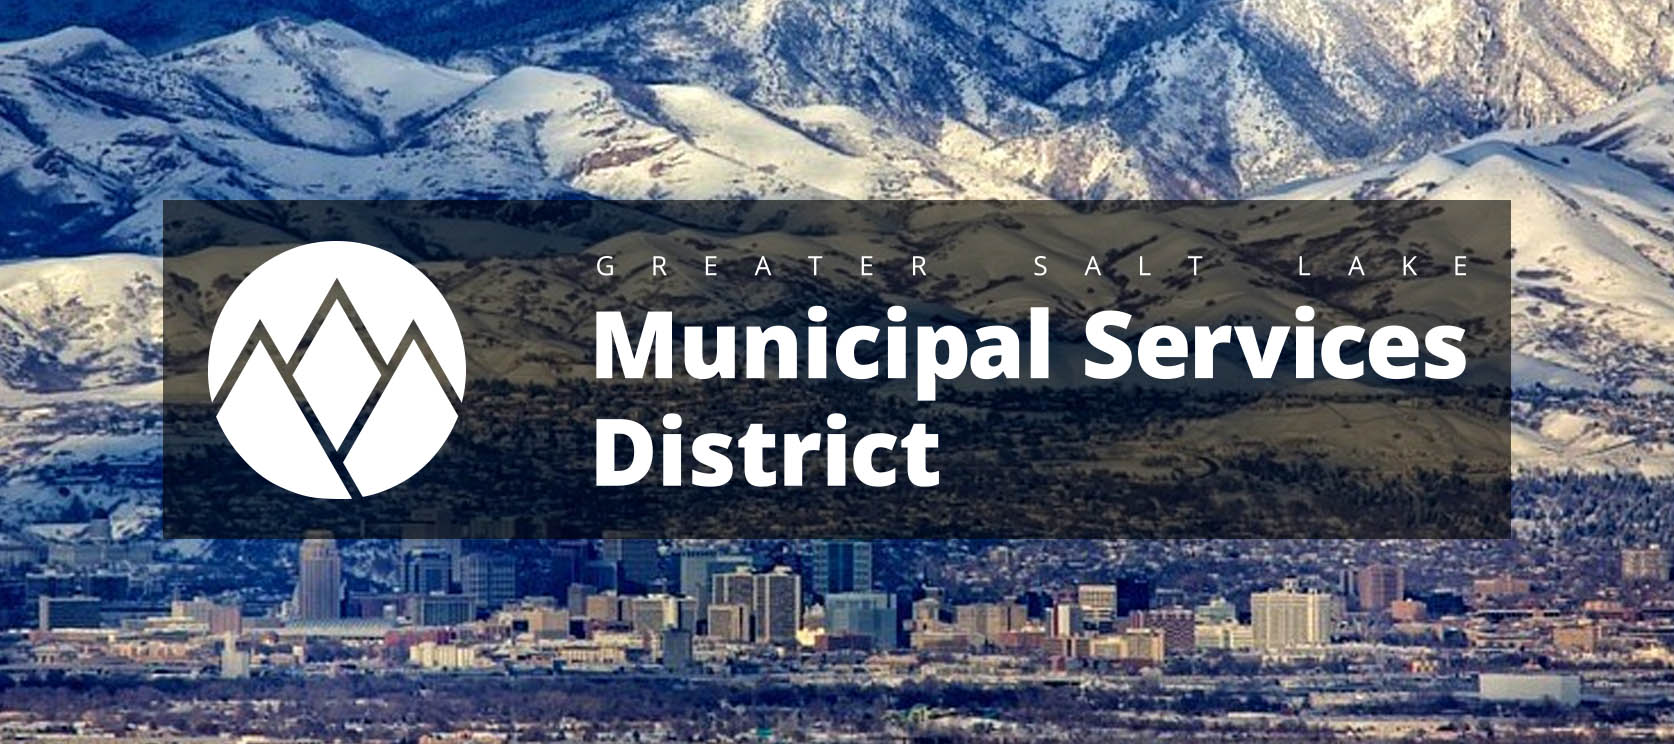 Gridics partners with Greater Salt Lake Municipal Services District (MSD) to upgrade zoning and planning technology